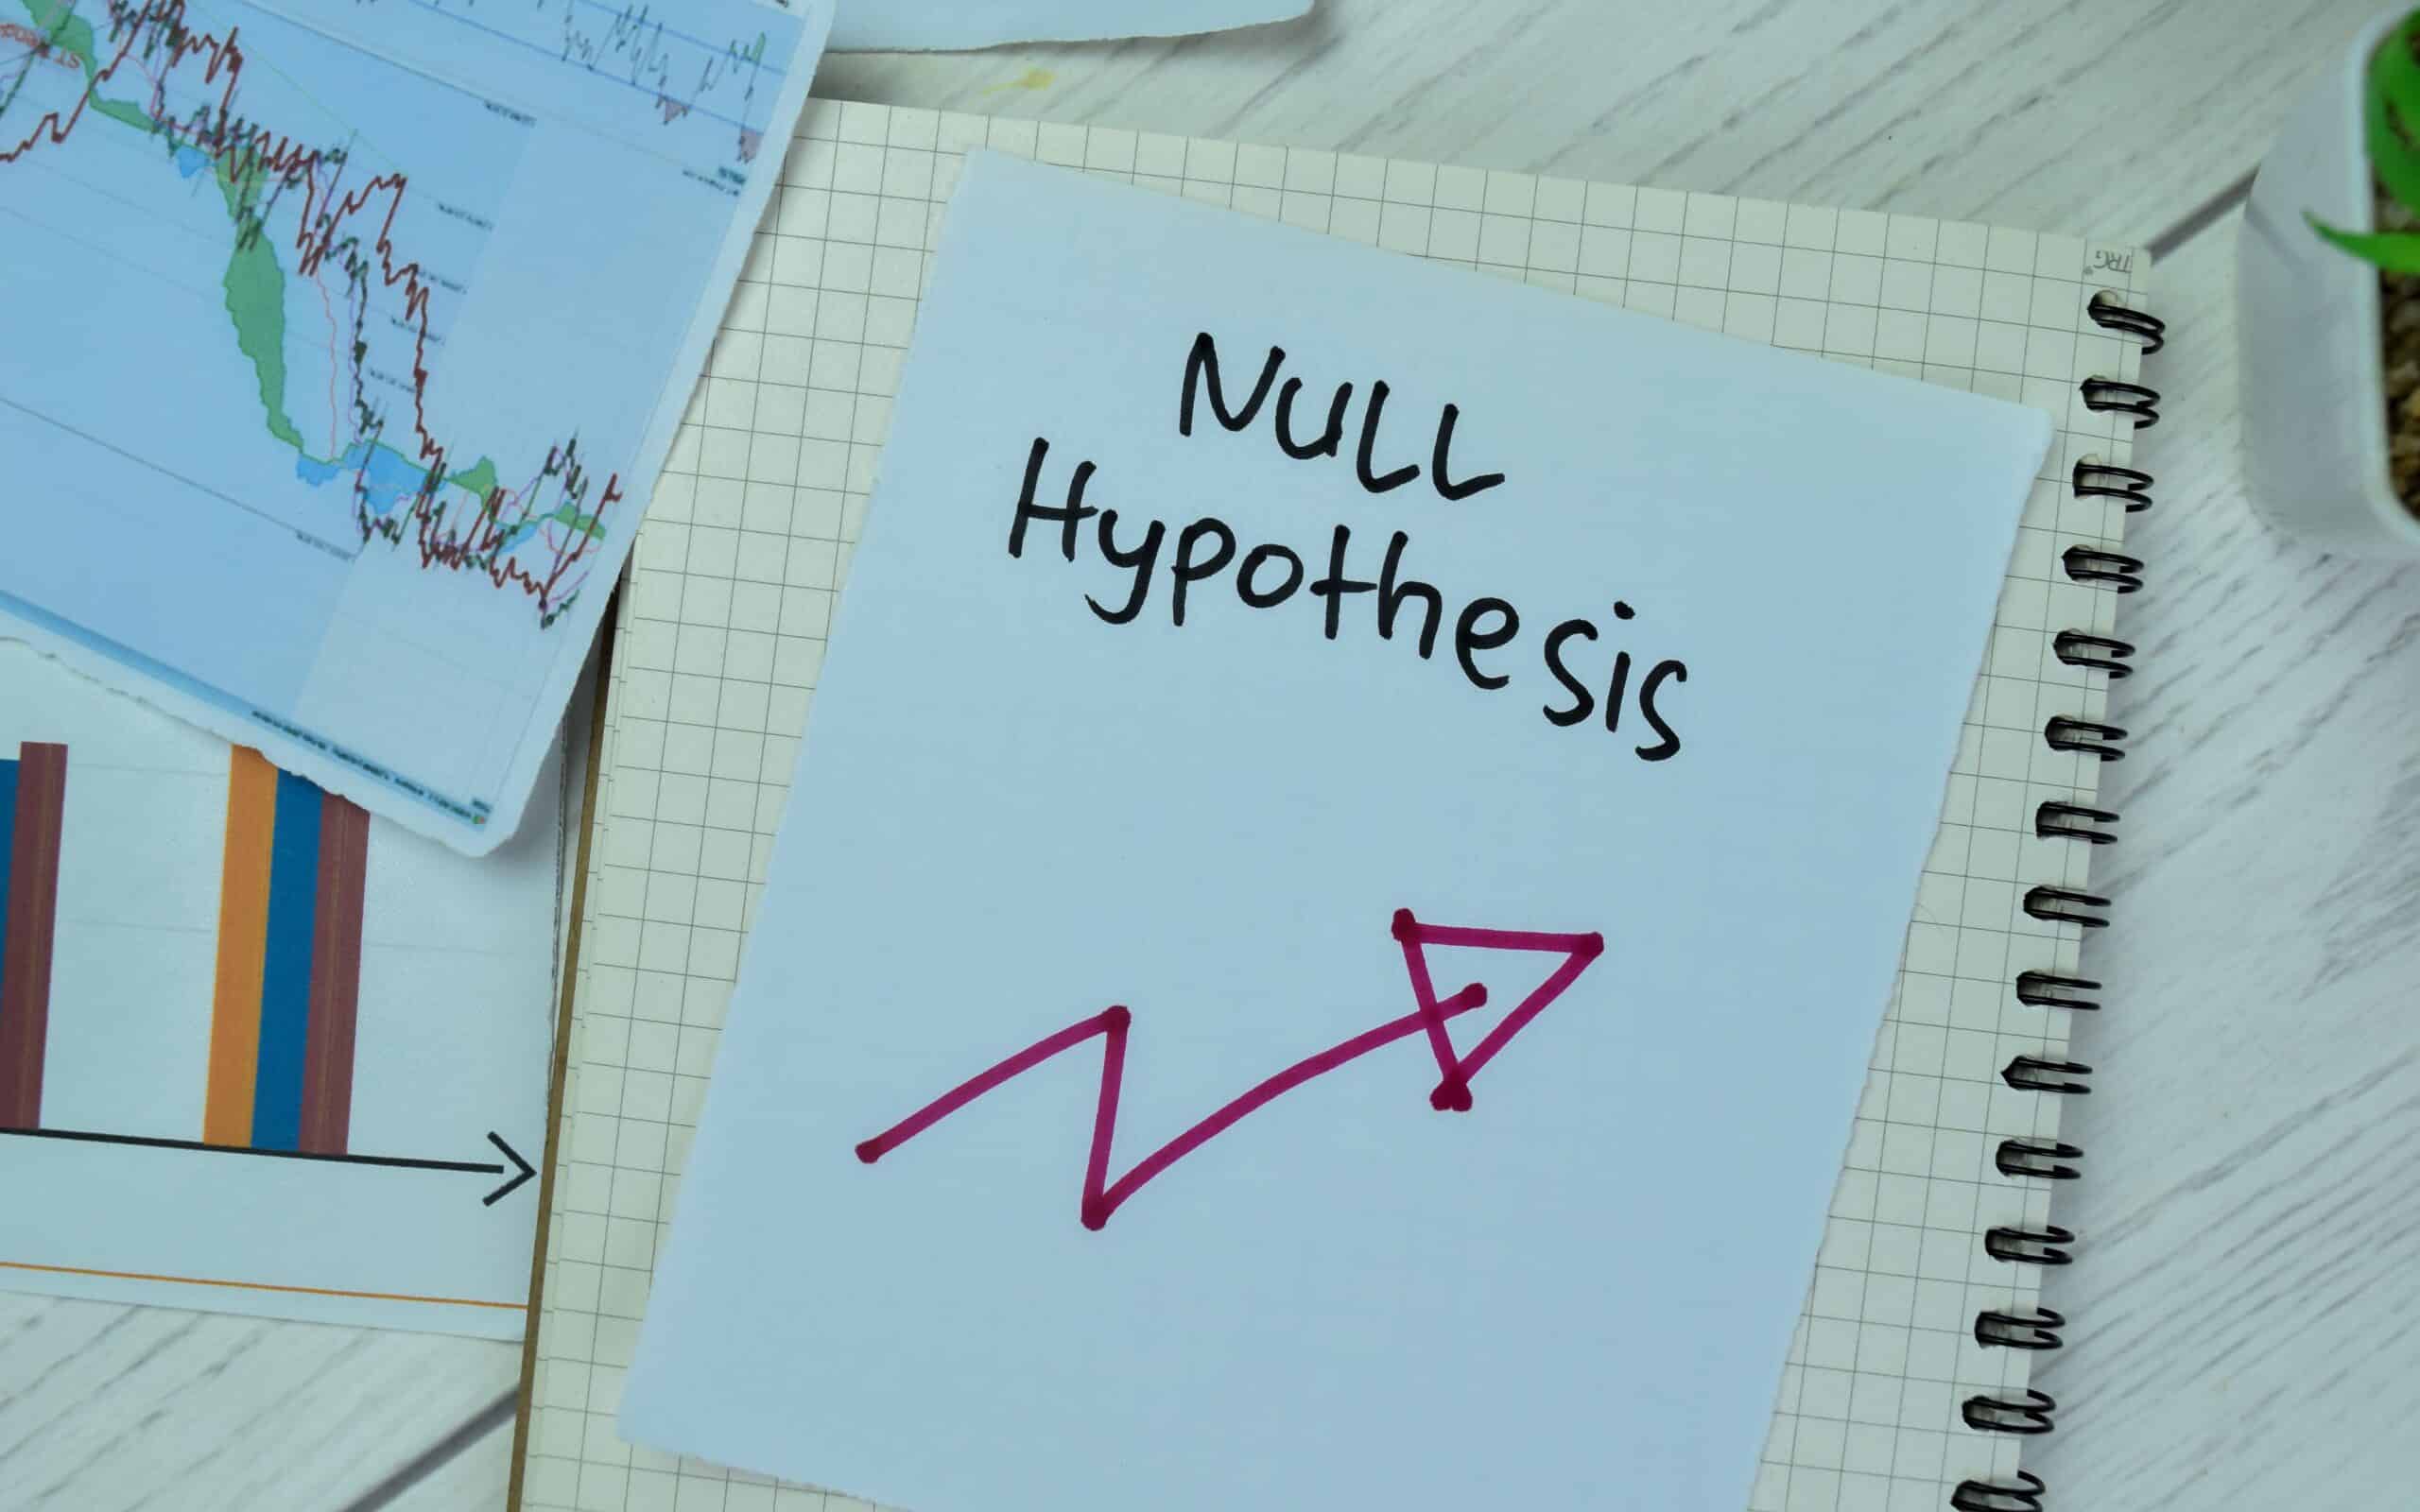 null hypothesis conclusion